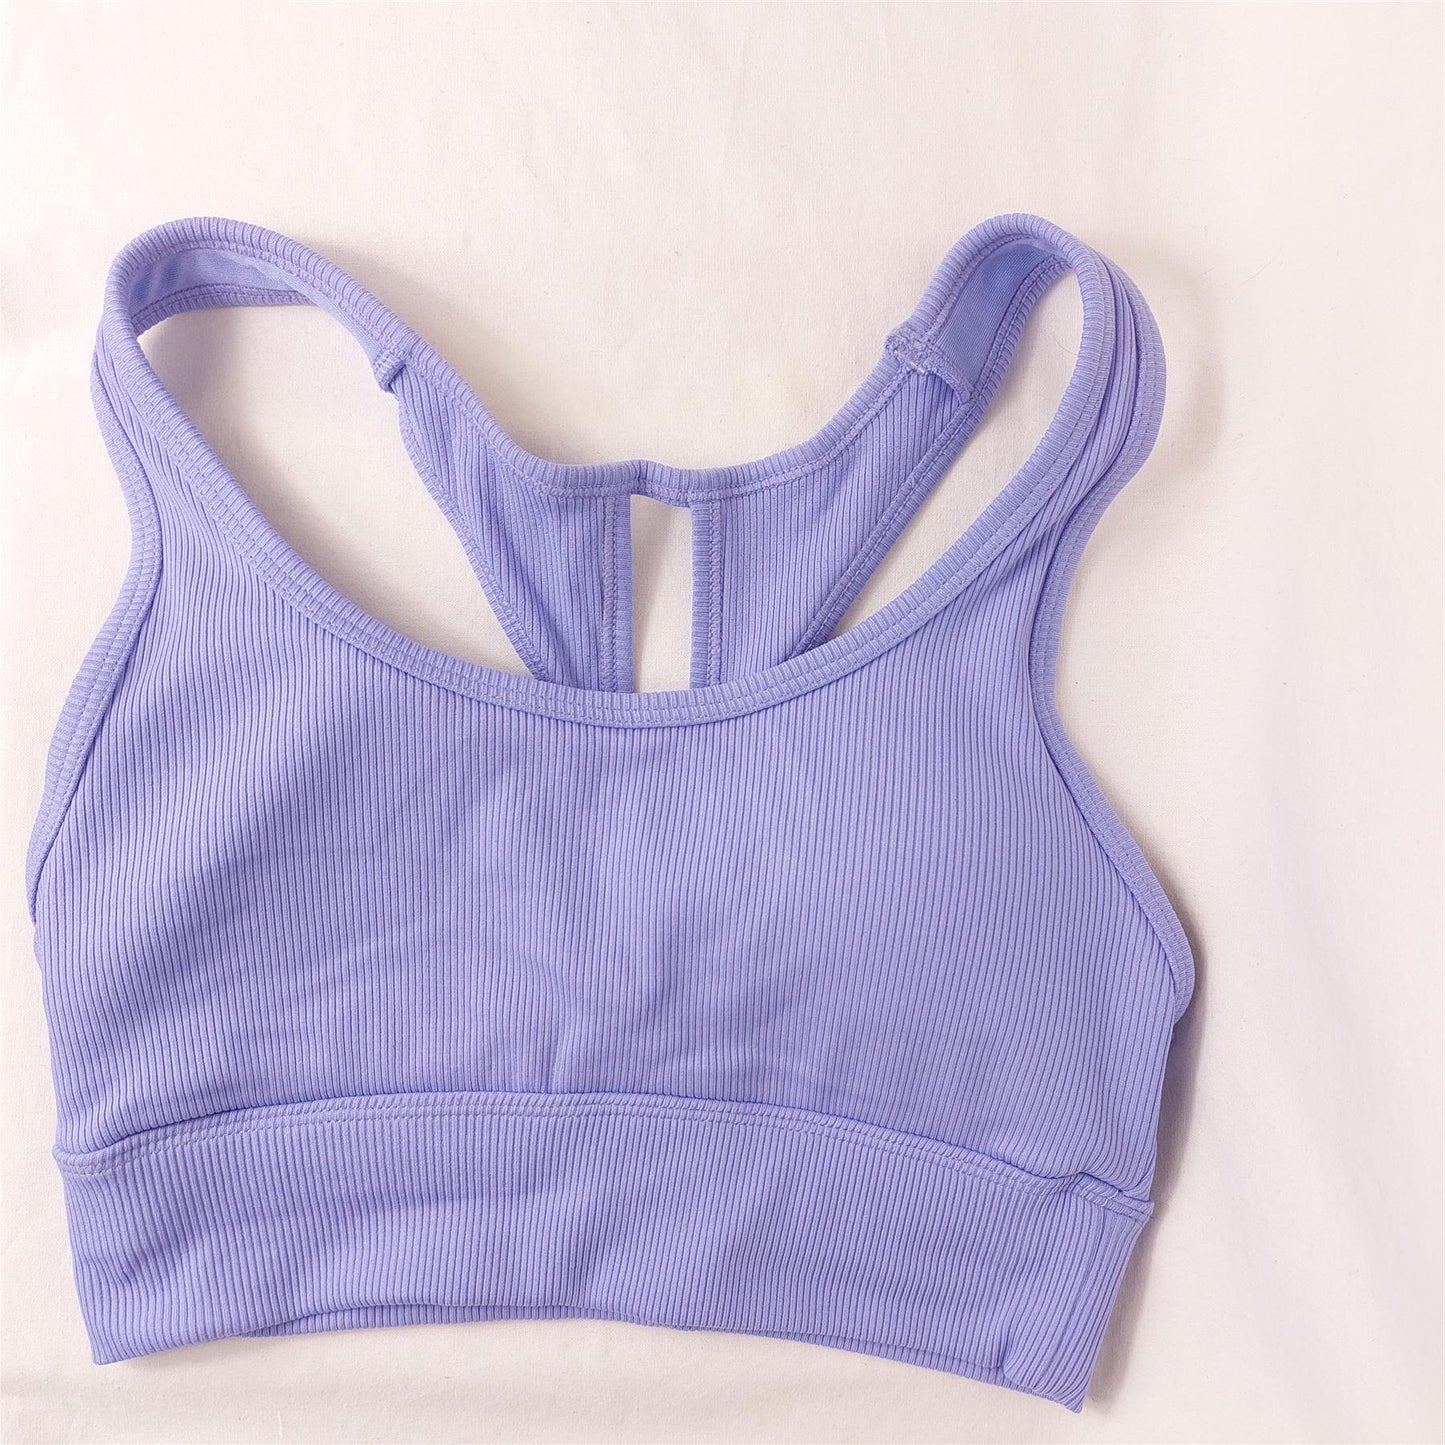 Yoga Top Sports Bra Crop Top Freely Academy Non-Wired Removable Padding Ribbed